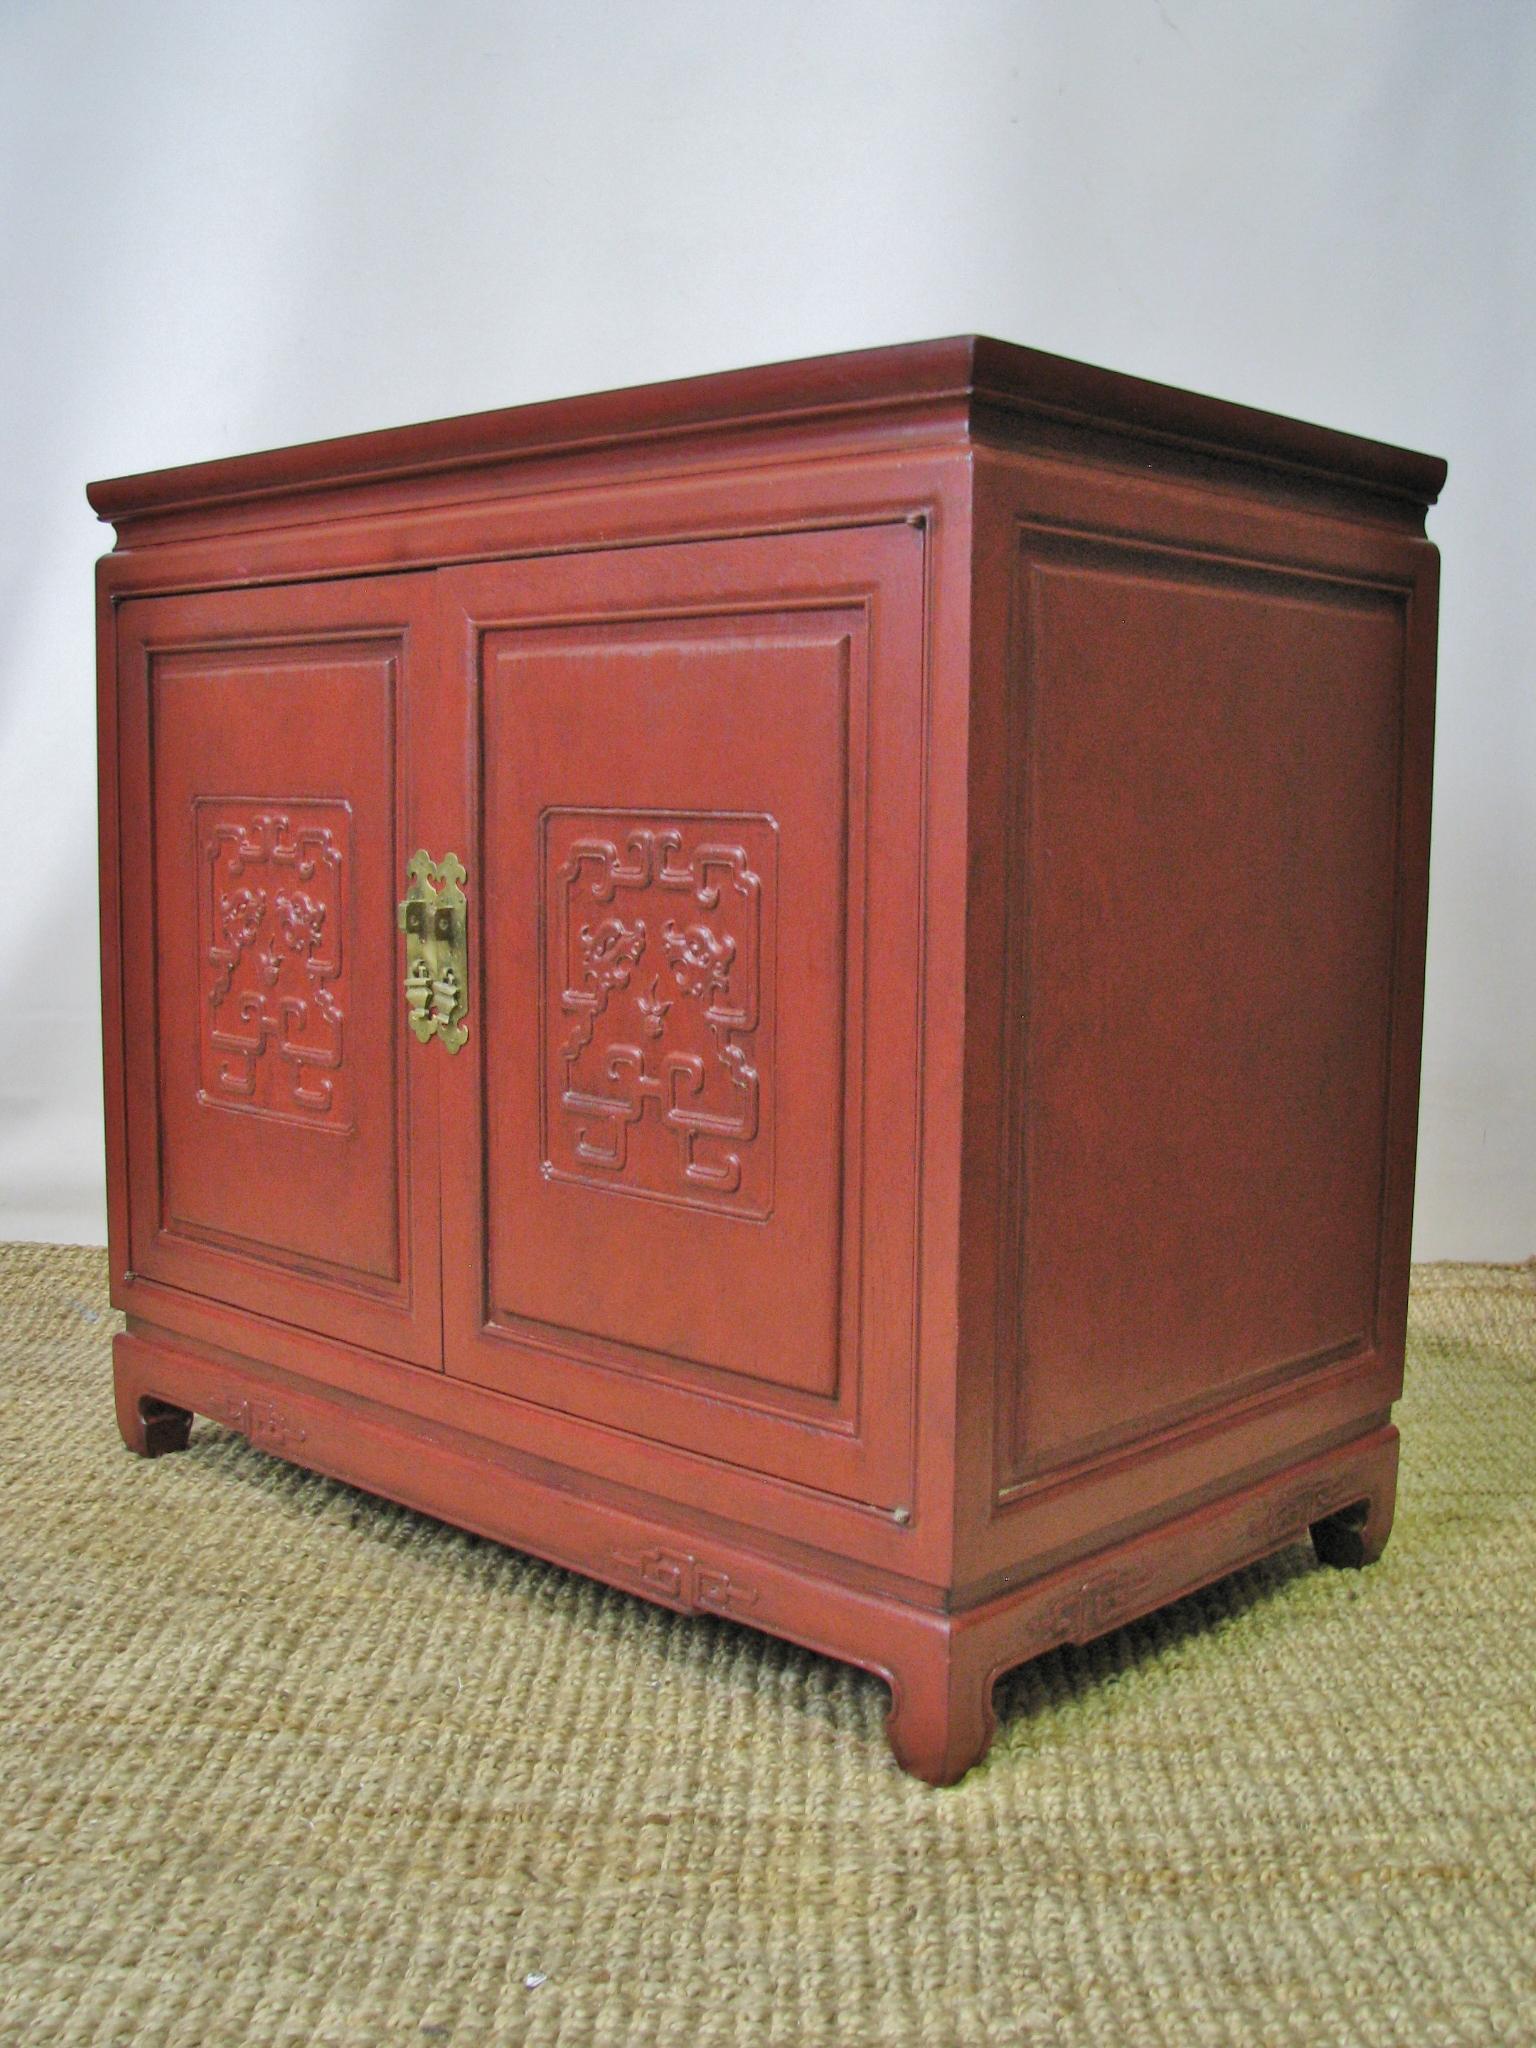 Striking pair of vintage and high end 1960s, Asian style two-door cabinets. Simple and elegant form, set on Ming style feet. Central panels on each door feature Asian calligraphic motifs. The skirt also features these same style details. Raised